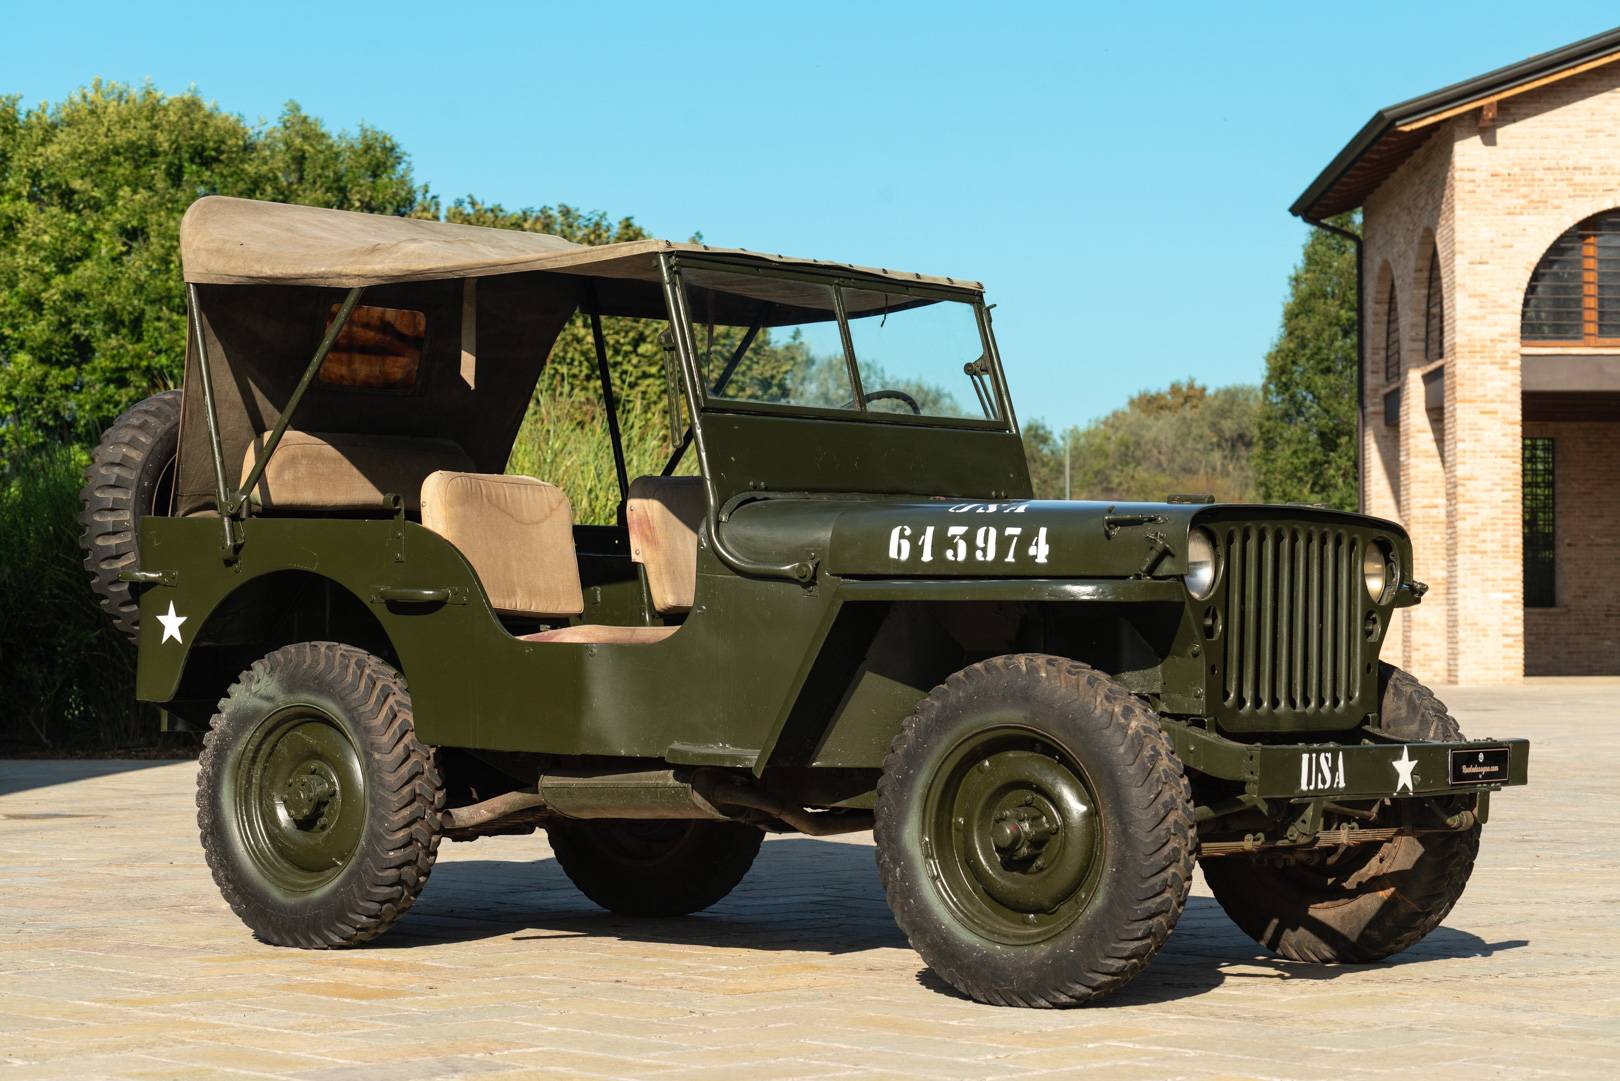 Willys MB Classic Cars for Sale - Classic Trader